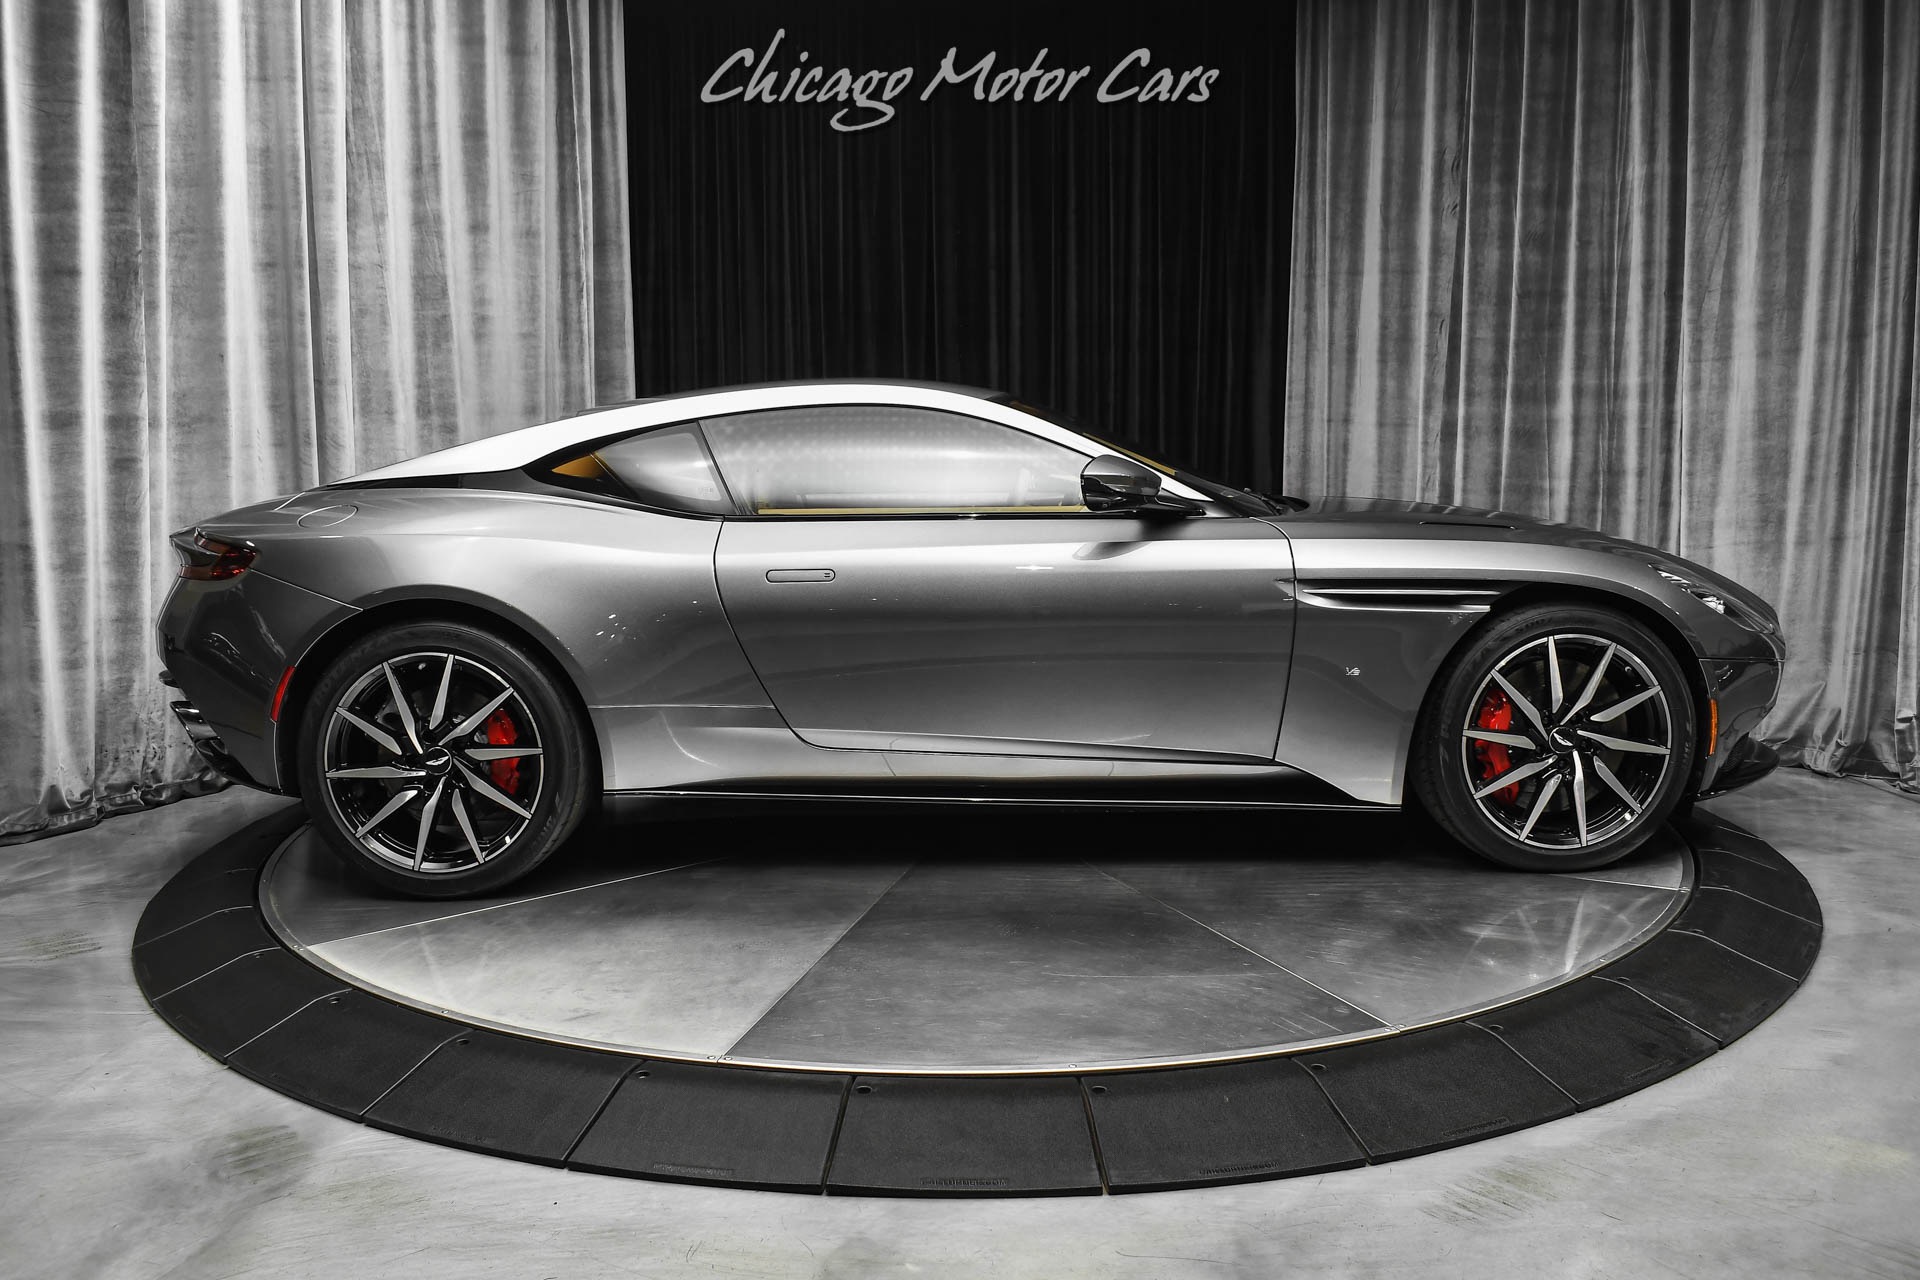 Used-2017-Aston-Martin-DB11-Launch-Edition-Lux-and-Contemporary-Packs-Full-PPF-Annual-Service-Done